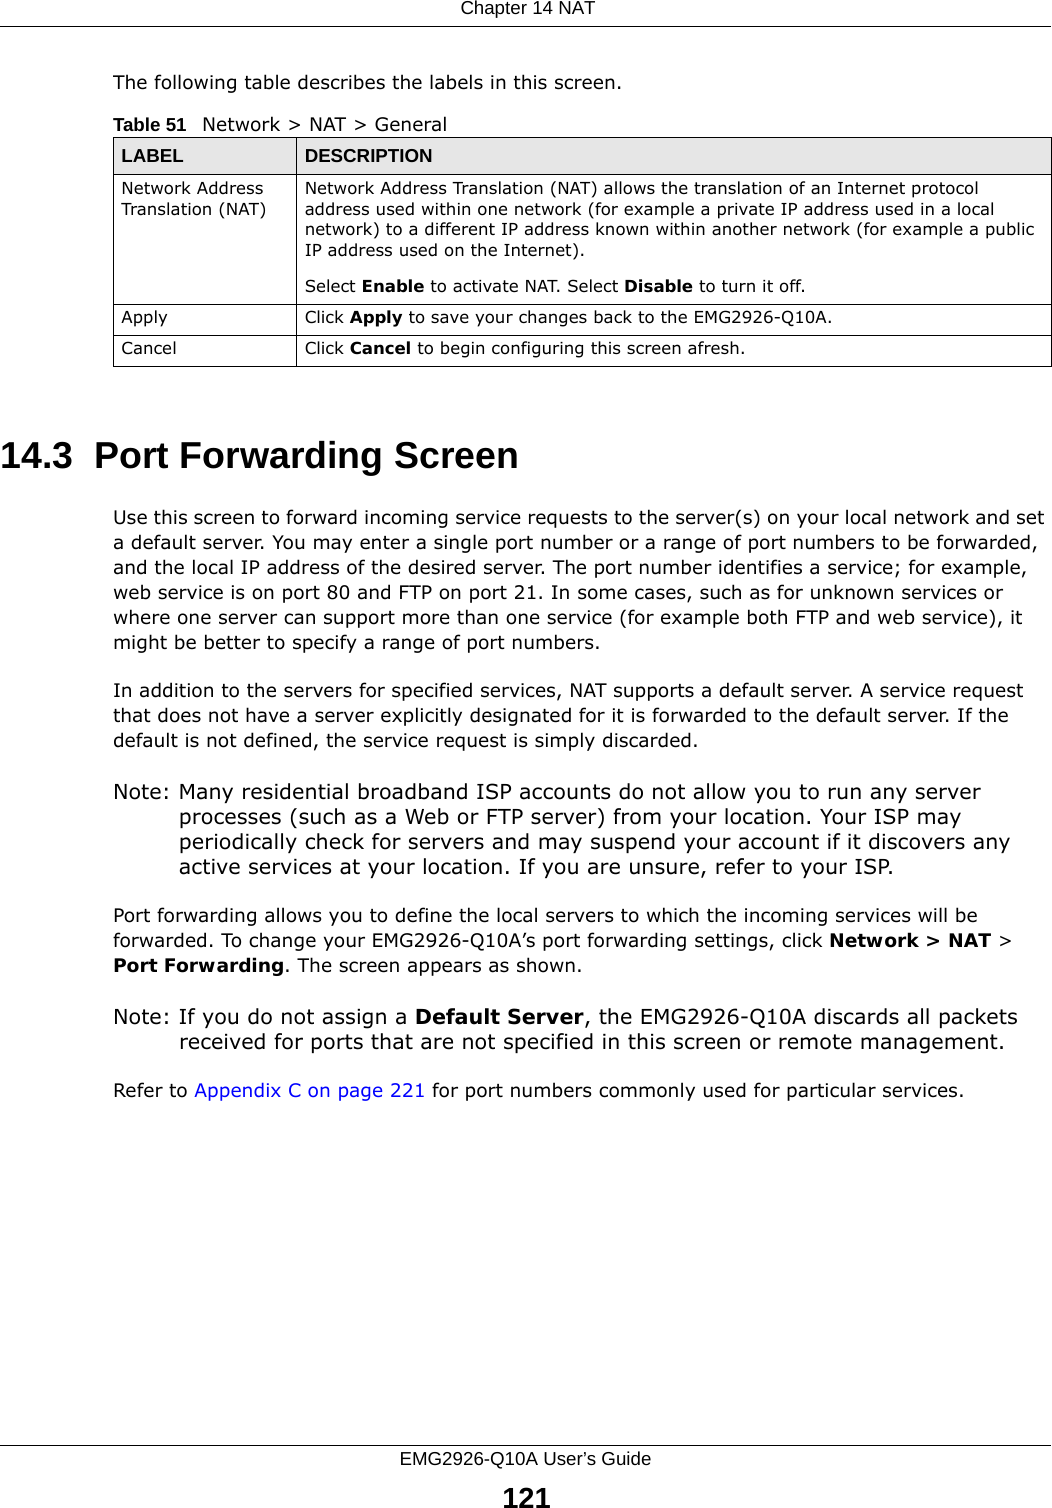  Chapter 14 NATEMG2926-Q10A User’s Guide121The following table describes the labels in this screen.14.3  Port Forwarding Screen   Use this screen to forward incoming service requests to the server(s) on your local network and set a default server. You may enter a single port number or a range of port numbers to be forwarded, and the local IP address of the desired server. The port number identifies a service; for example, web service is on port 80 and FTP on port 21. In some cases, such as for unknown services or where one server can support more than one service (for example both FTP and web service), it might be better to specify a range of port numbers.In addition to the servers for specified services, NAT supports a default server. A service request that does not have a server explicitly designated for it is forwarded to the default server. If the default is not defined, the service request is simply discarded.Note: Many residential broadband ISP accounts do not allow you to run any server processes (such as a Web or FTP server) from your location. Your ISP may periodically check for servers and may suspend your account if it discovers any active services at your location. If you are unsure, refer to your ISP.Port forwarding allows you to define the local servers to which the incoming services will be forwarded. To change your EMG2926-Q10A’s port forwarding settings, click Network &gt; NAT &gt; Port Forwarding. The screen appears as shown.Note: If you do not assign a Default Server, the EMG2926-Q10A discards all packets received for ports that are not specified in this screen or remote management.Refer to Appendix C on page 221 for port numbers commonly used for particular services.Table 51   Network &gt; NAT &gt; GeneralLABEL DESCRIPTIONNetwork Address Translation (NAT)Network Address Translation (NAT) allows the translation of an Internet protocol address used within one network (for example a private IP address used in a local network) to a different IP address known within another network (for example a public IP address used on the Internet). Select Enable to activate NAT. Select Disable to turn it off.Apply Click Apply to save your changes back to the EMG2926-Q10A.Cancel Click Cancel to begin configuring this screen afresh.